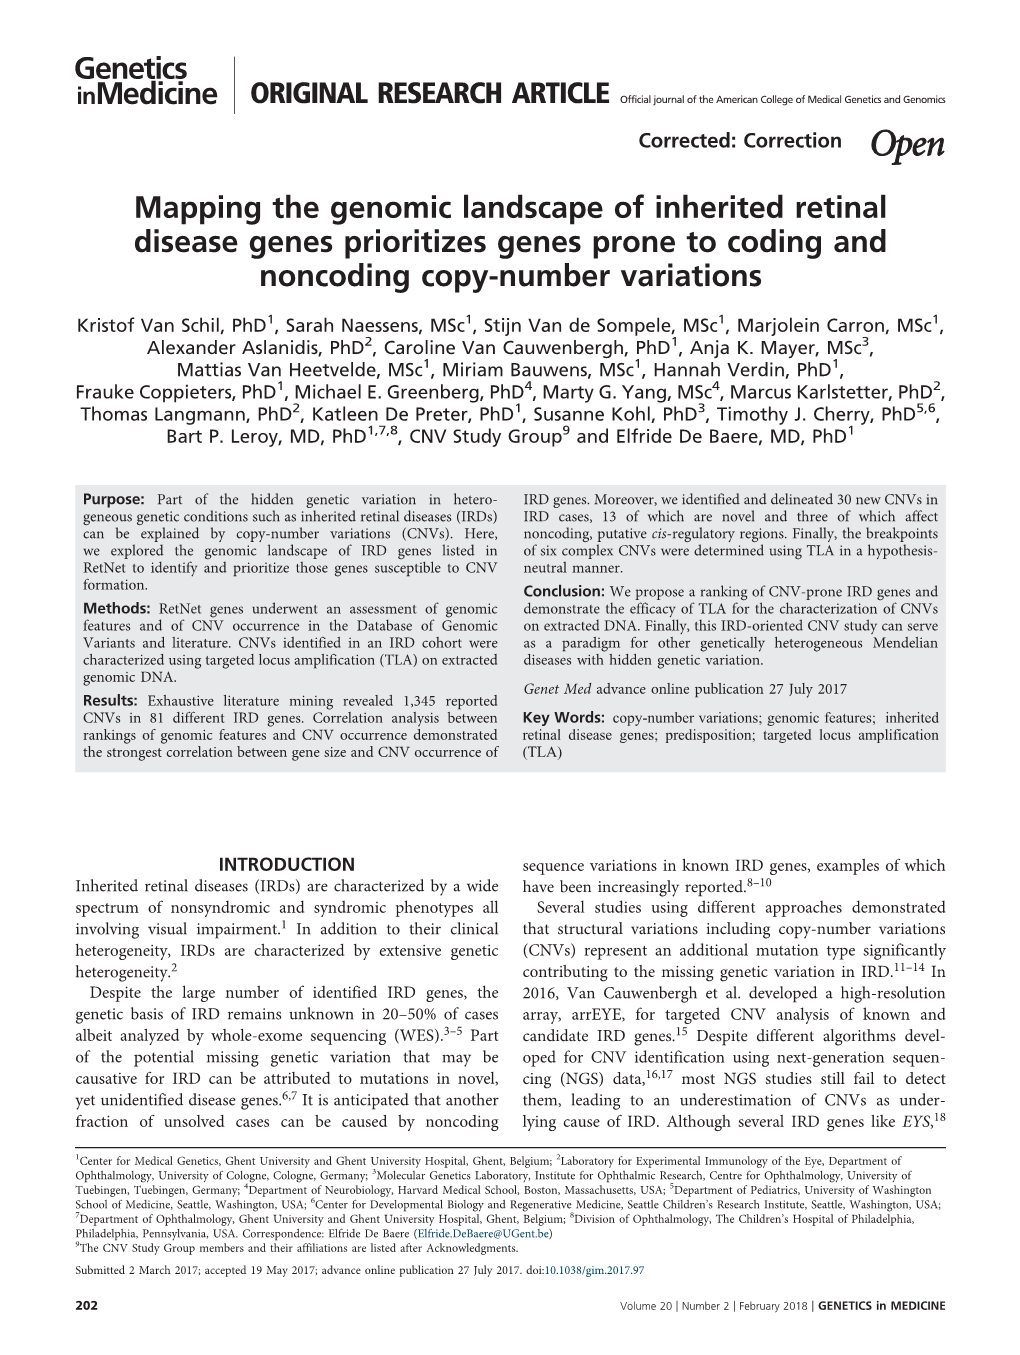 Mapping the Genomic Landscape of Inherited Retinal Disease Genes Prioritizes Genes Prone to Coding and Noncoding Copy-Number Variations